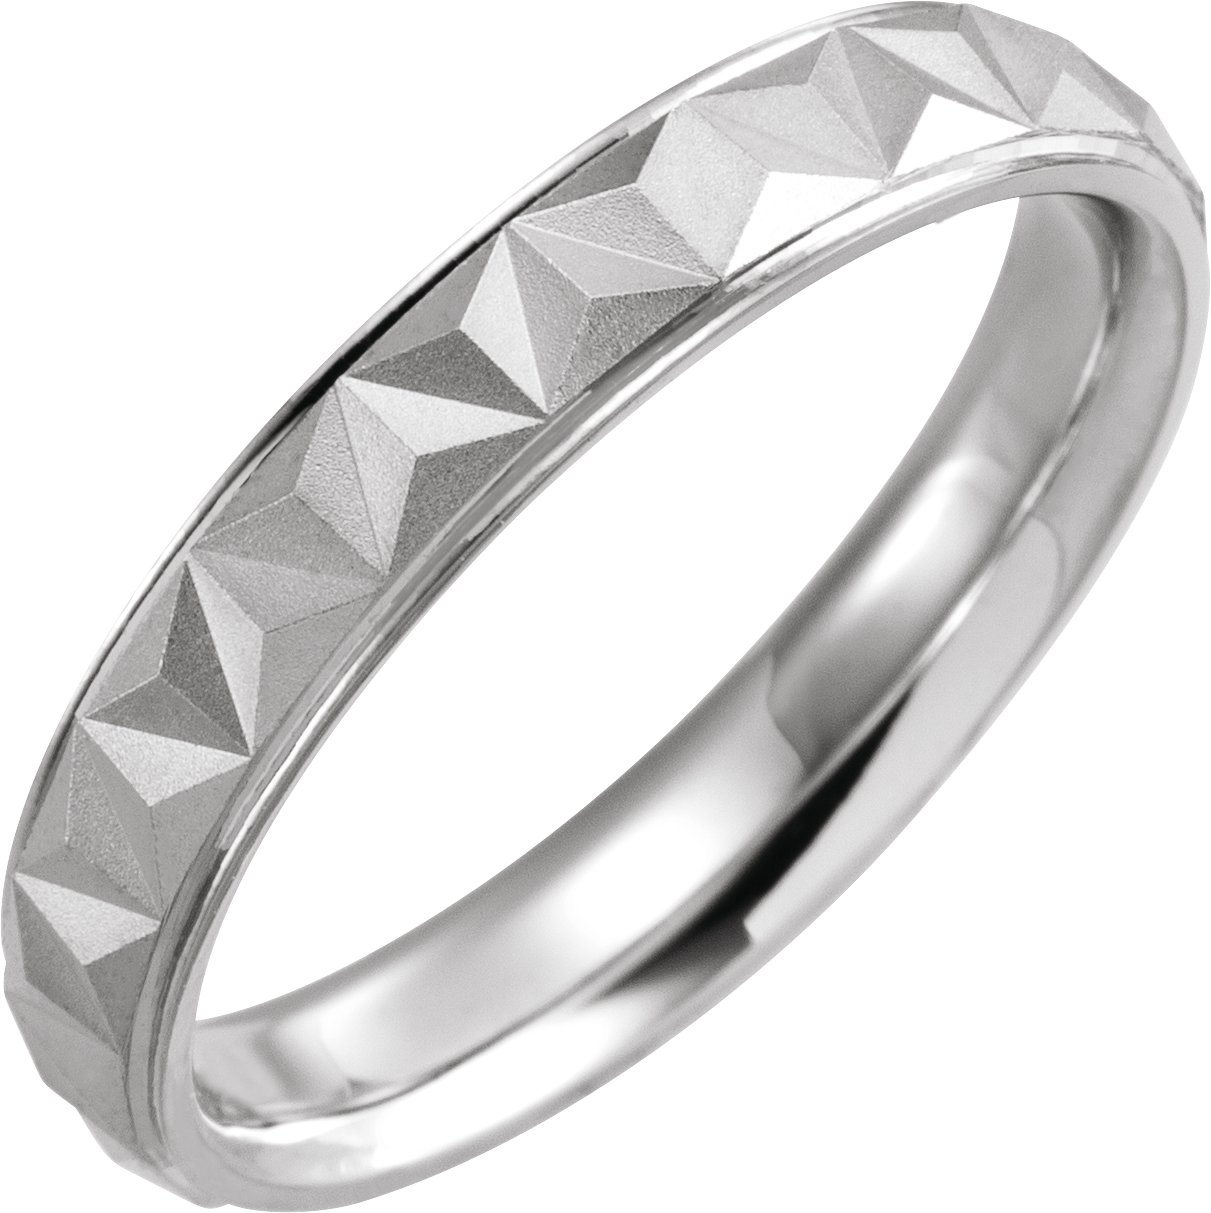 Sterling Silver 4 mm Geometric Band with Matte/Polished Finish Size 15